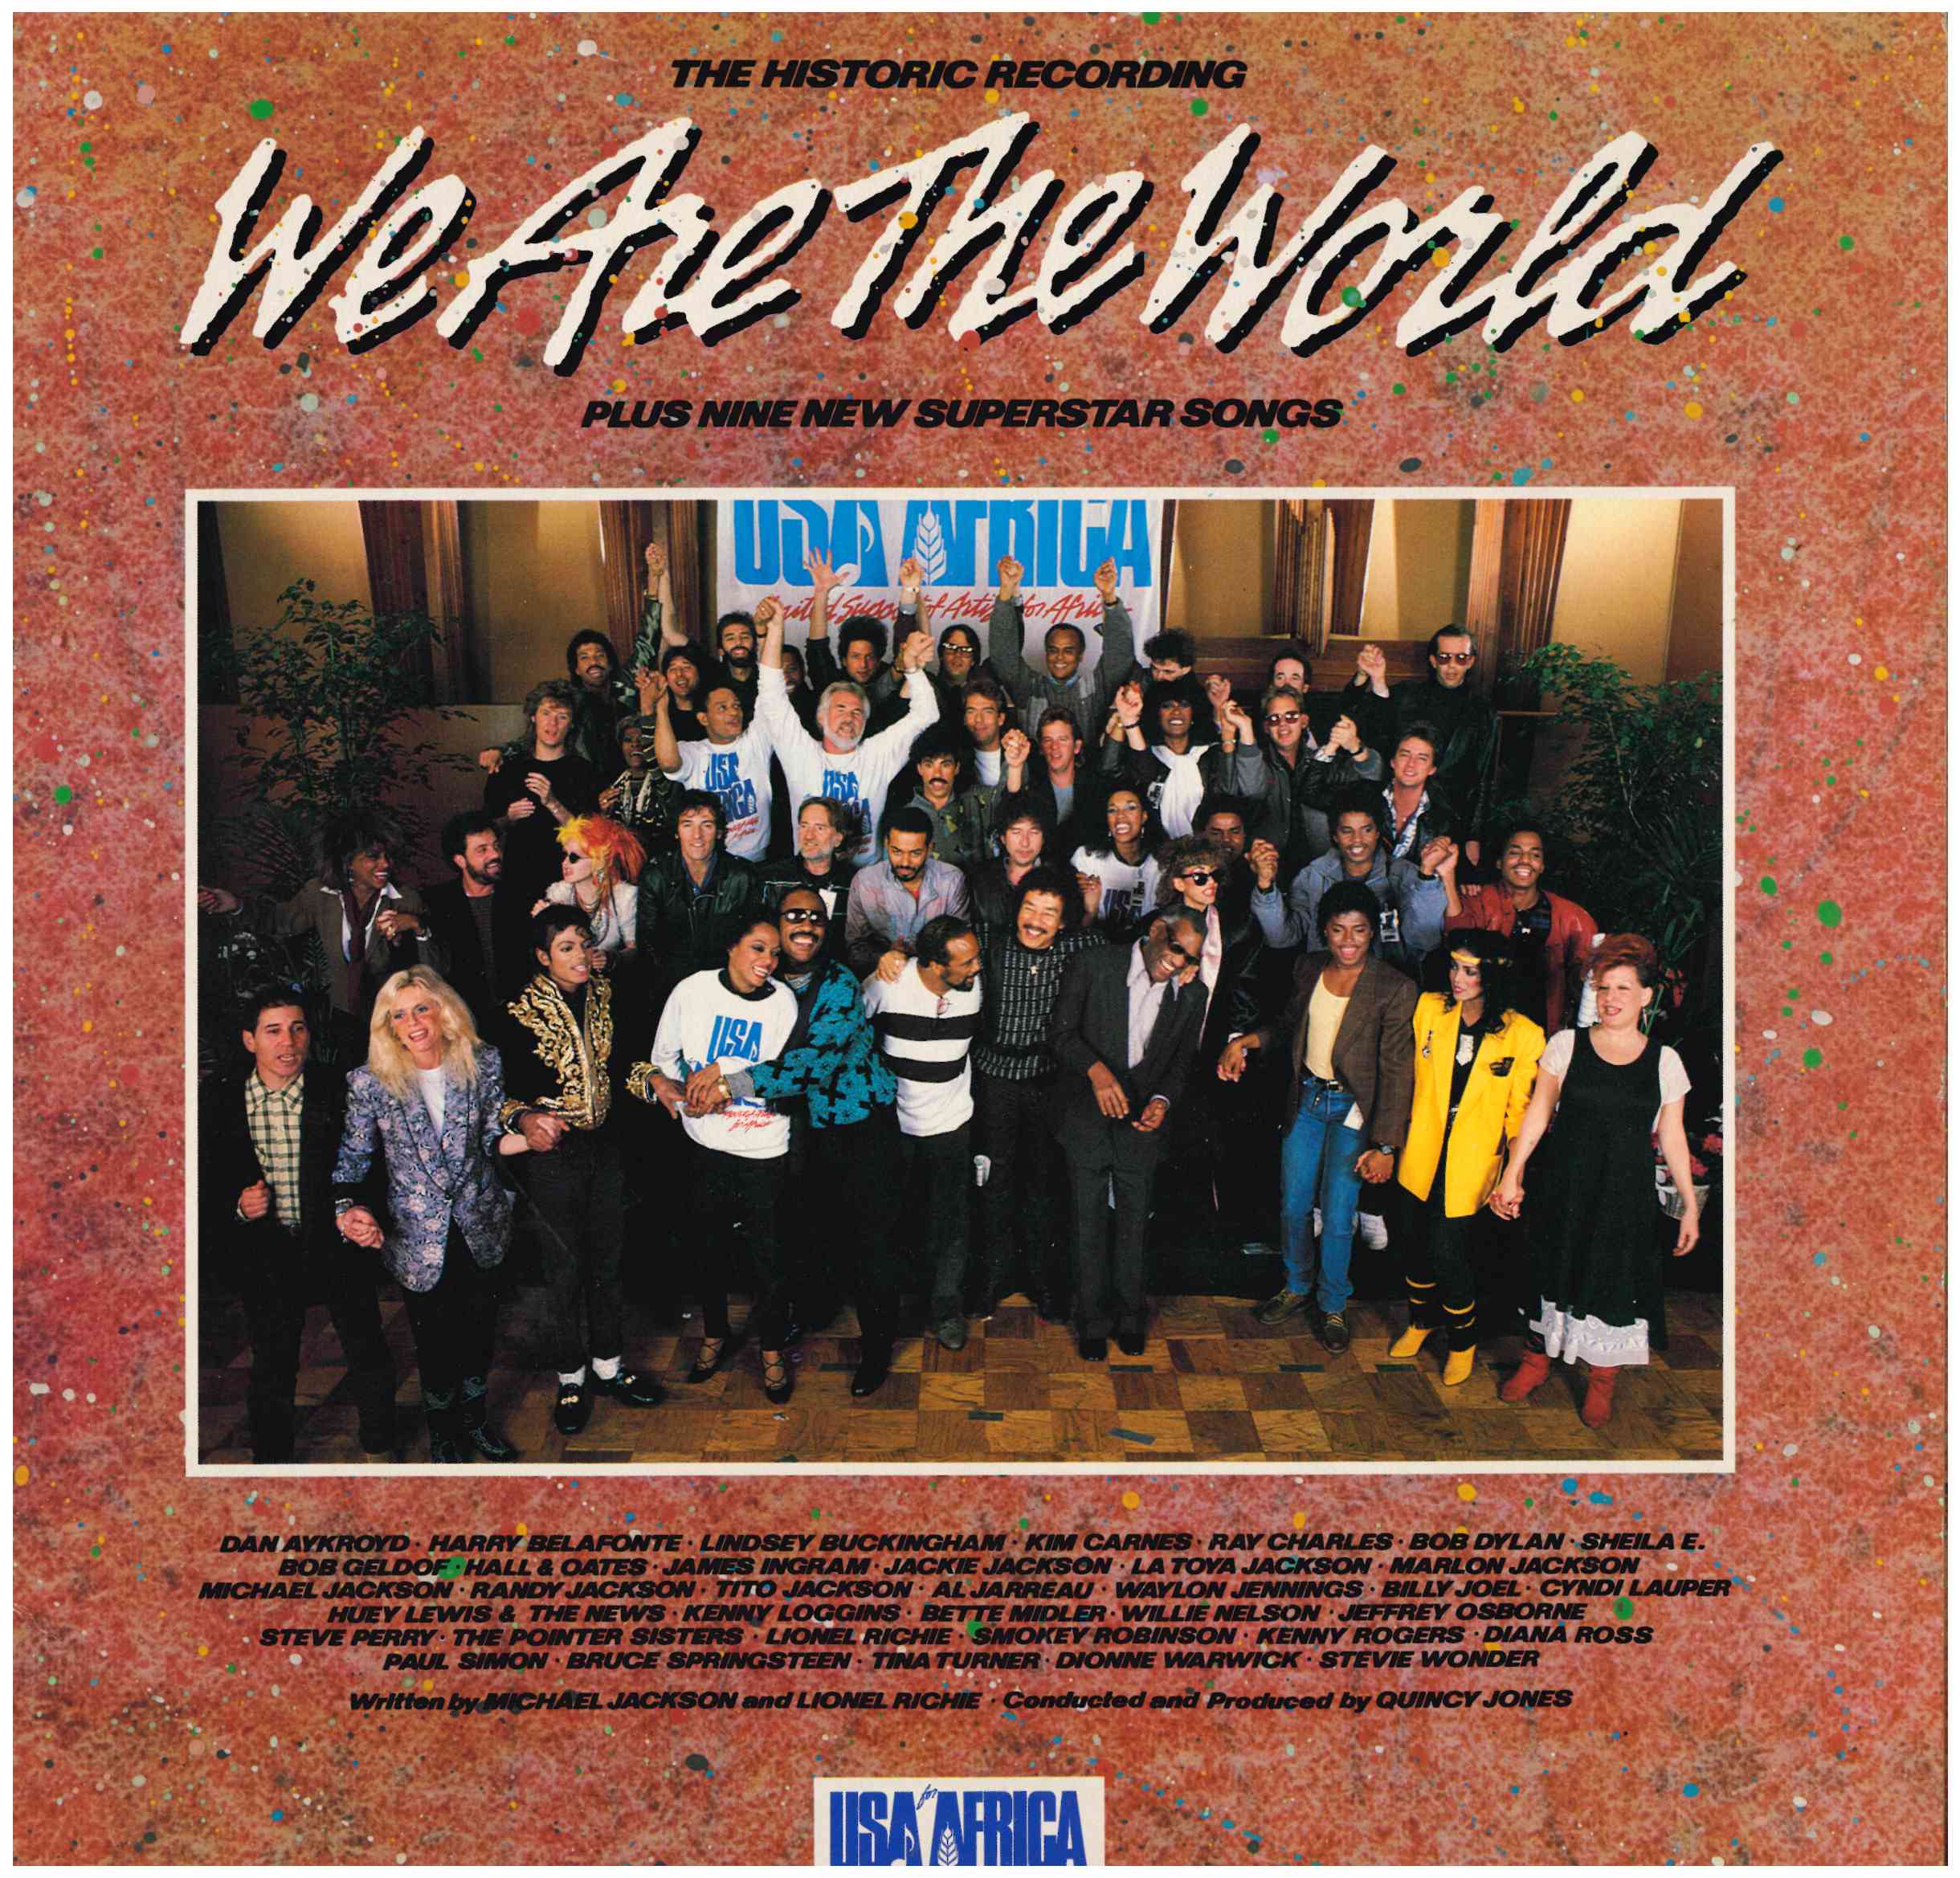 We are The World. Usa for Africa. CBS 1985 (S 26454)